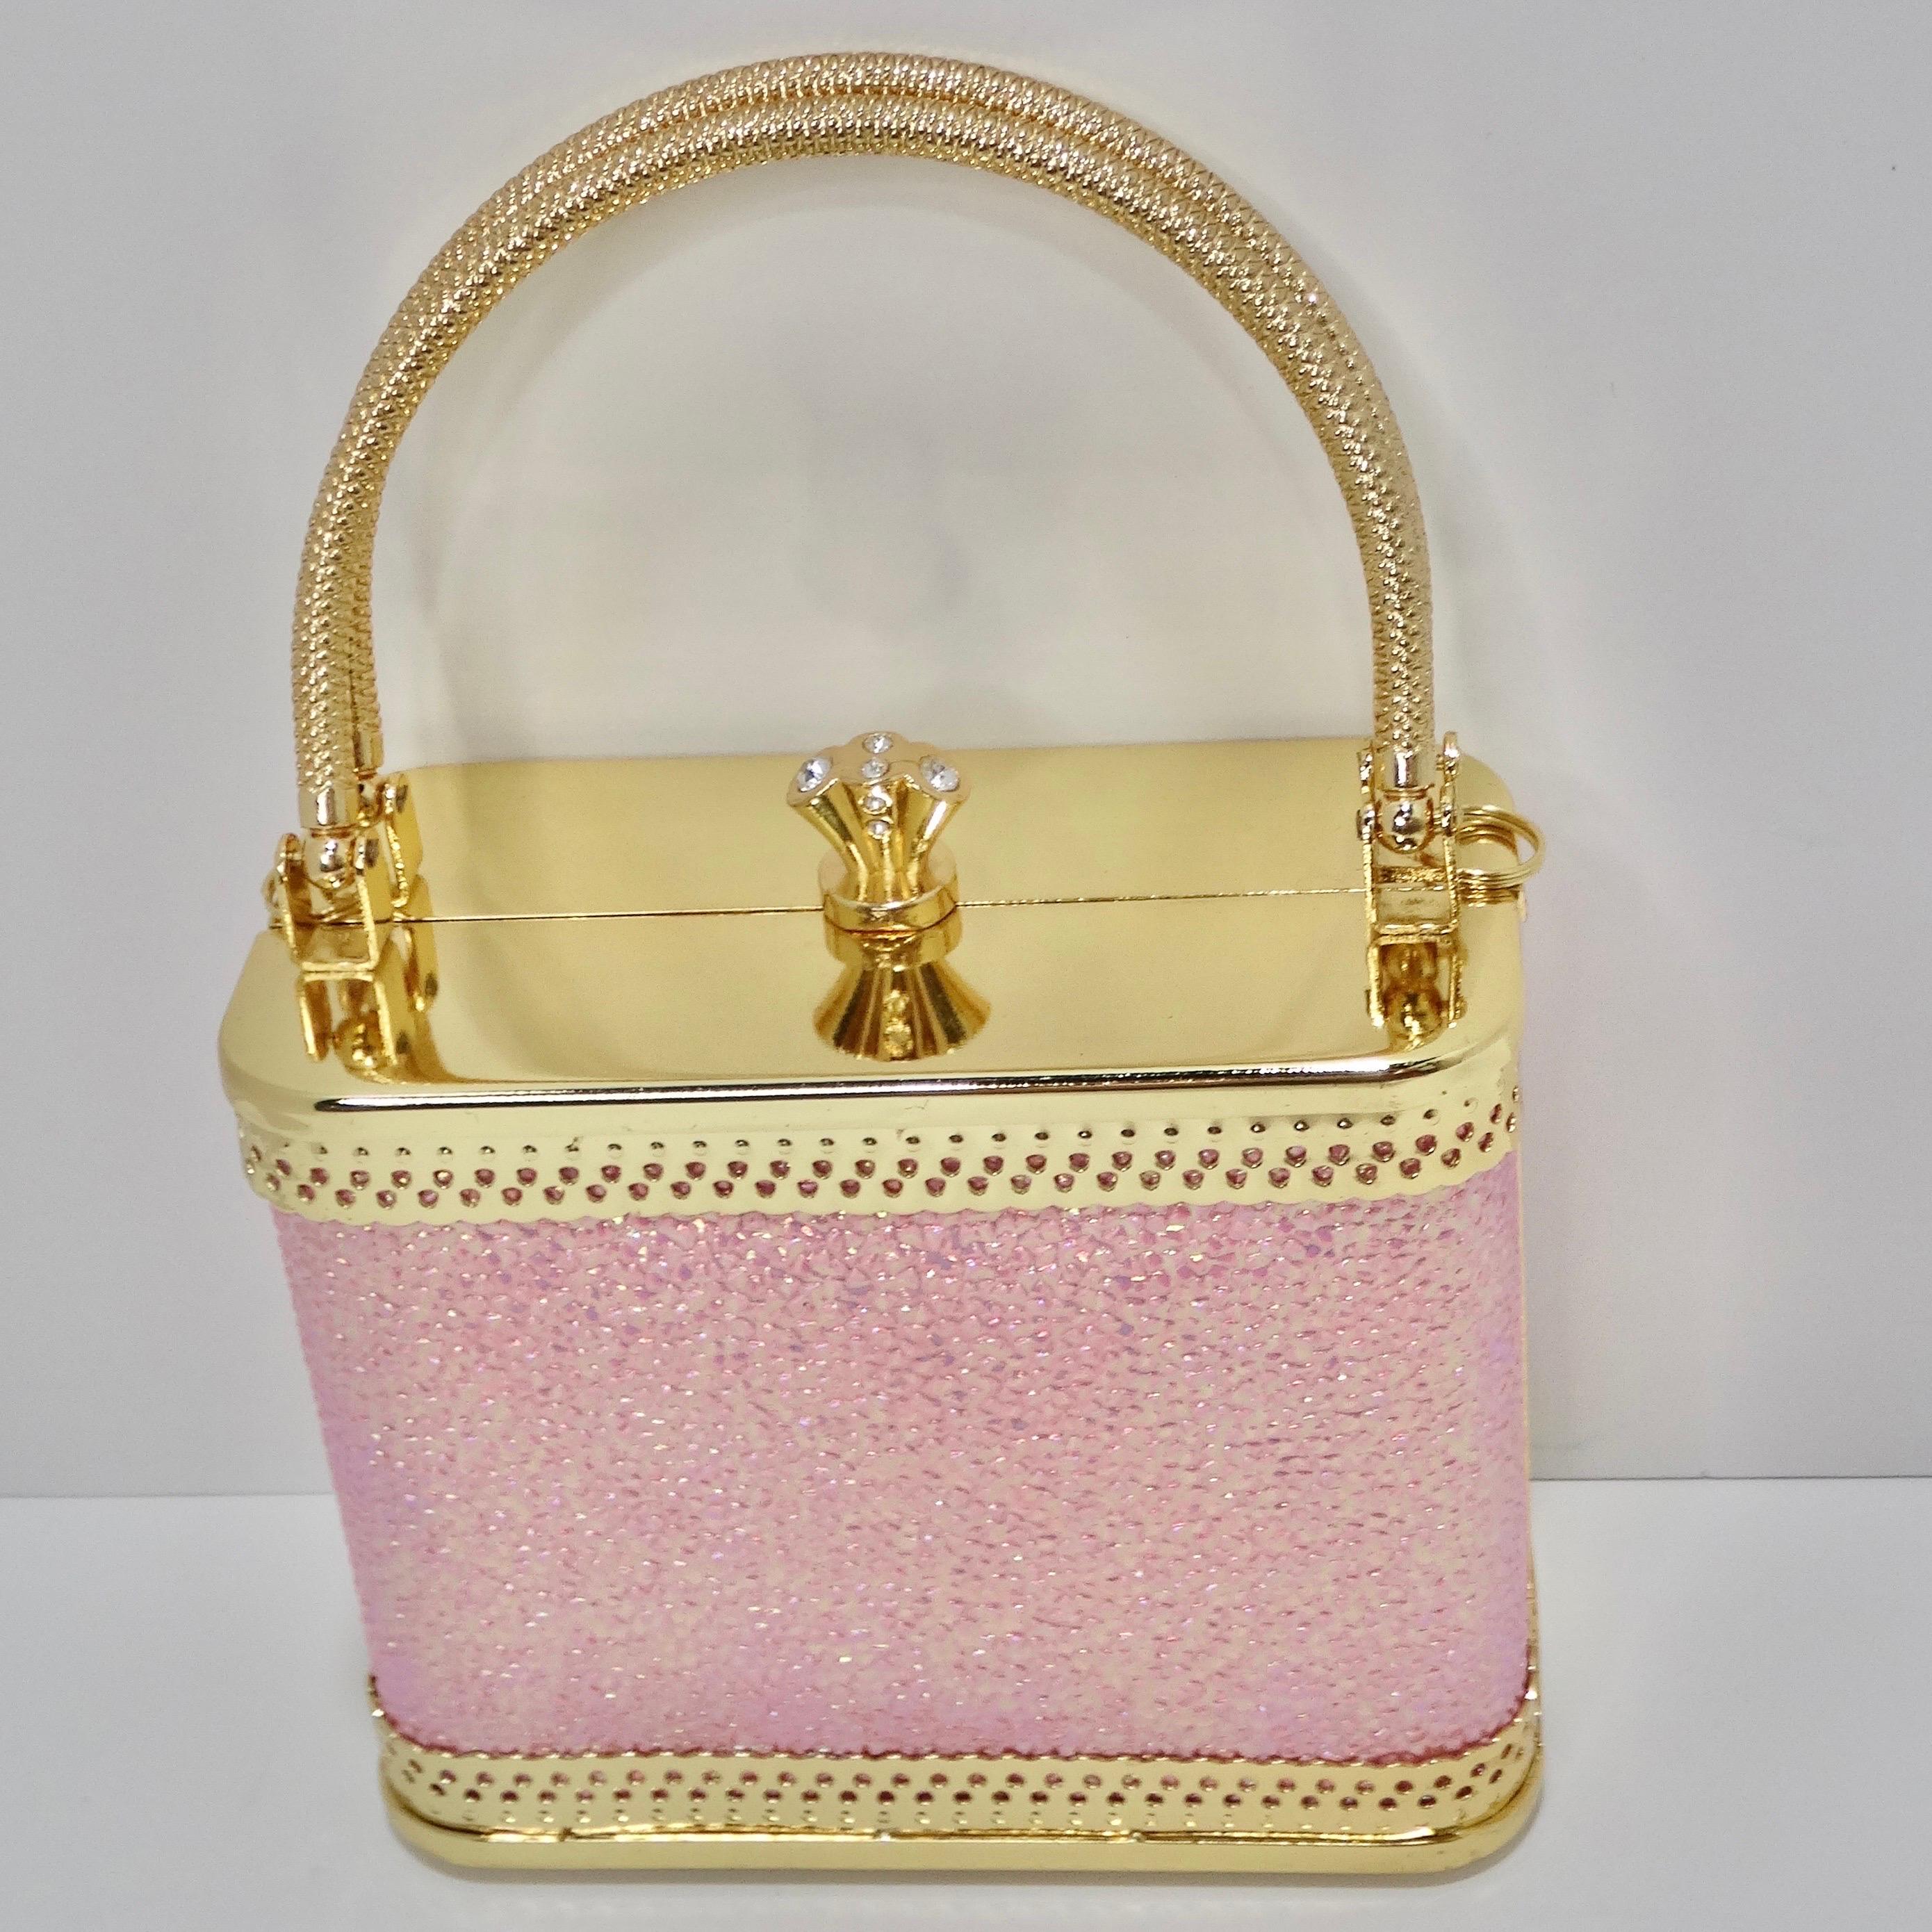 How adorable is this Colleen Lopez pink glitter mini handbag?! The perfect playful going out accessory to complete your look, this minaudiere style clutch features plated gold contrasting and eye catching sparkly pink. The bag features 2 structured